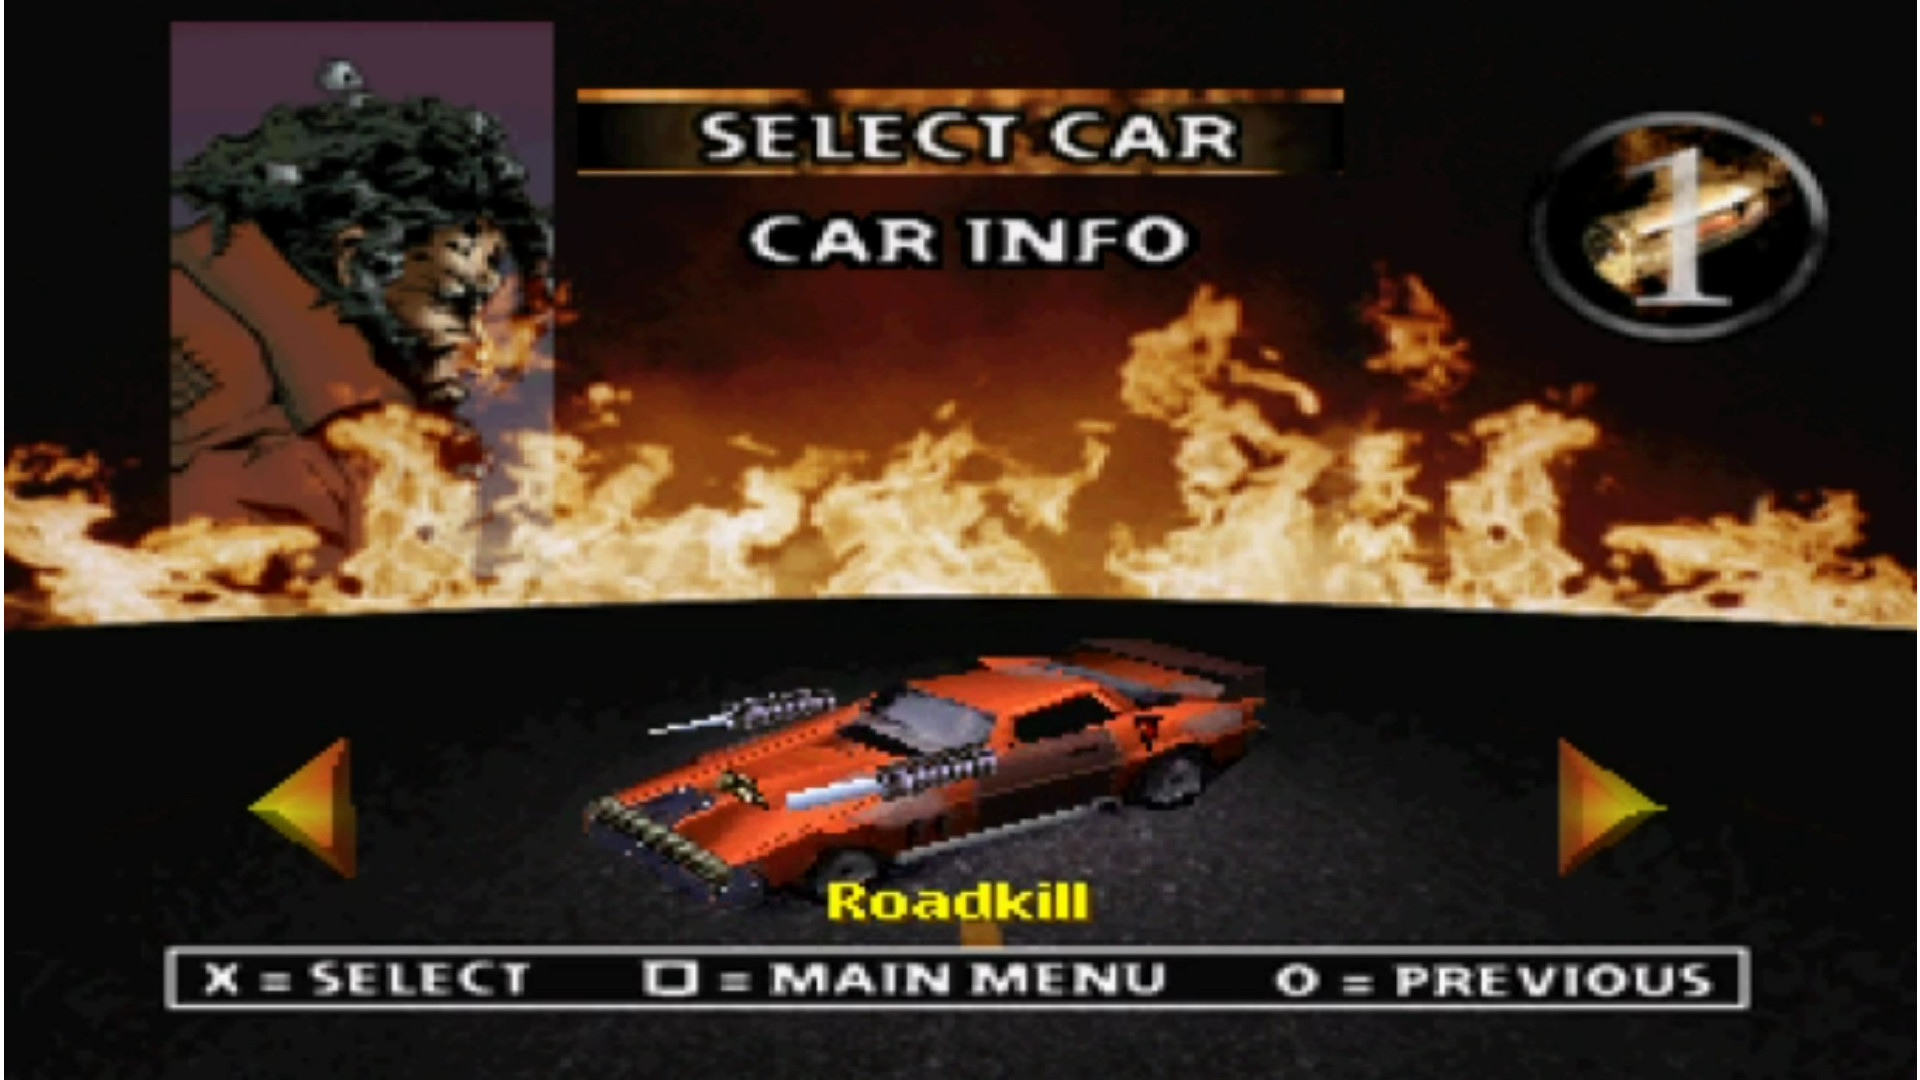 1920x1080 Roadkill: Roadkill like outlaw has been featured in all the twisted metal  games except for four. Most always some sort of junkyard muscle car.